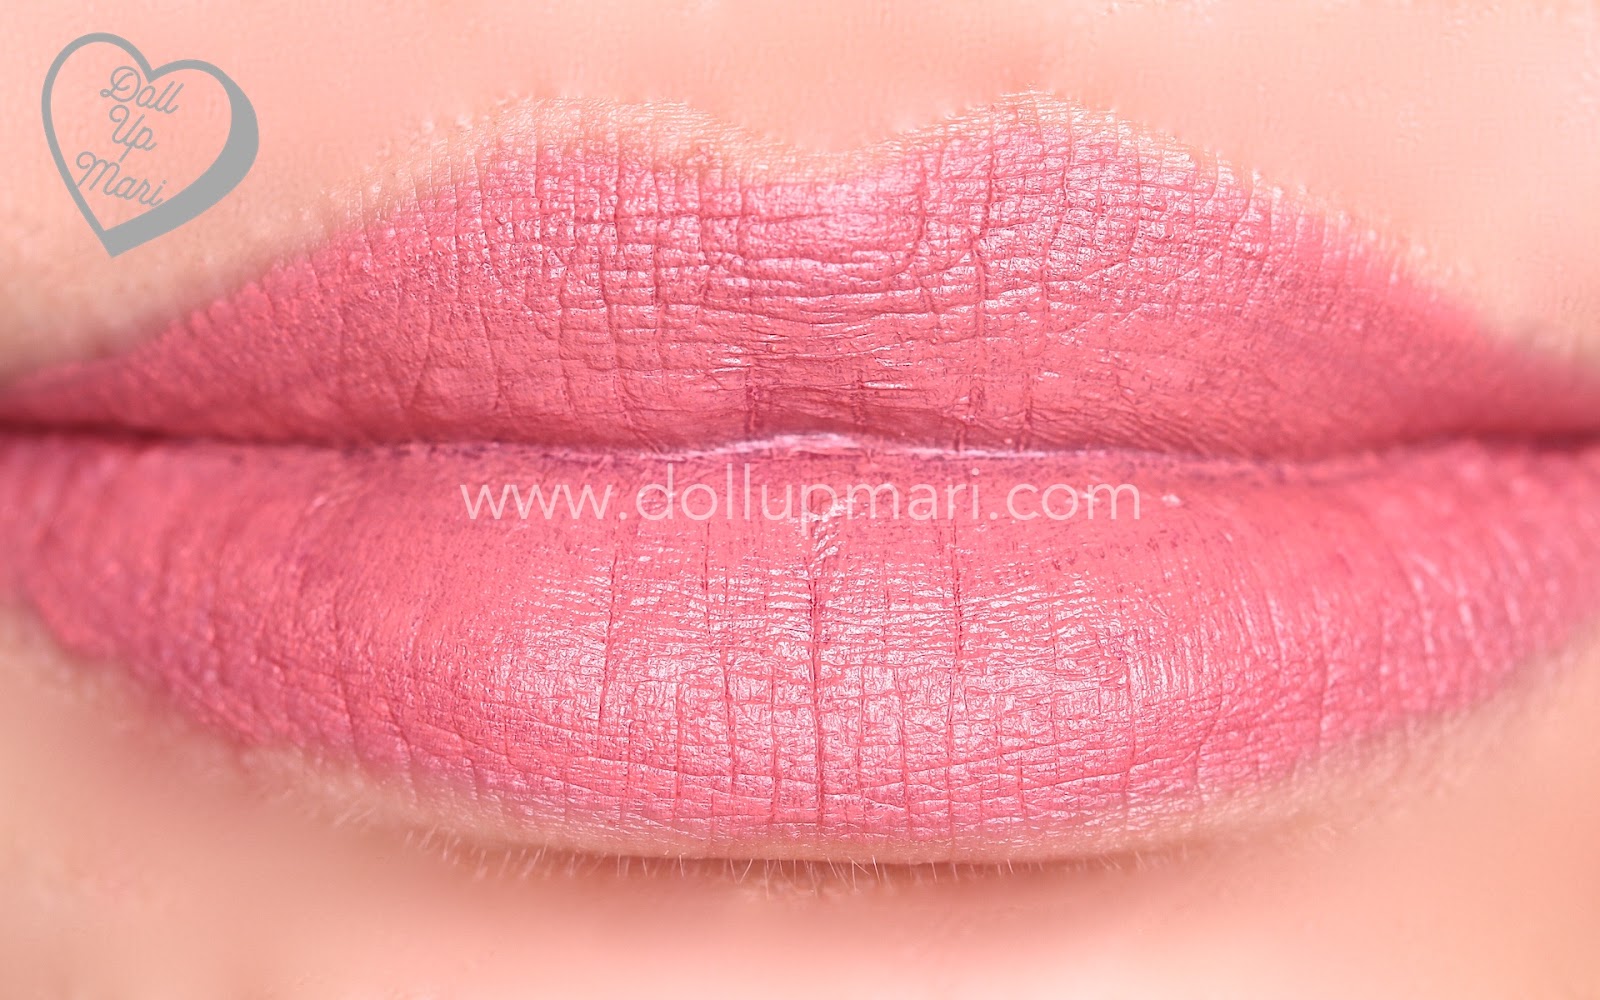 Maybelline Color Sensational Inti Matte Nudes Lipstick Naked Coral